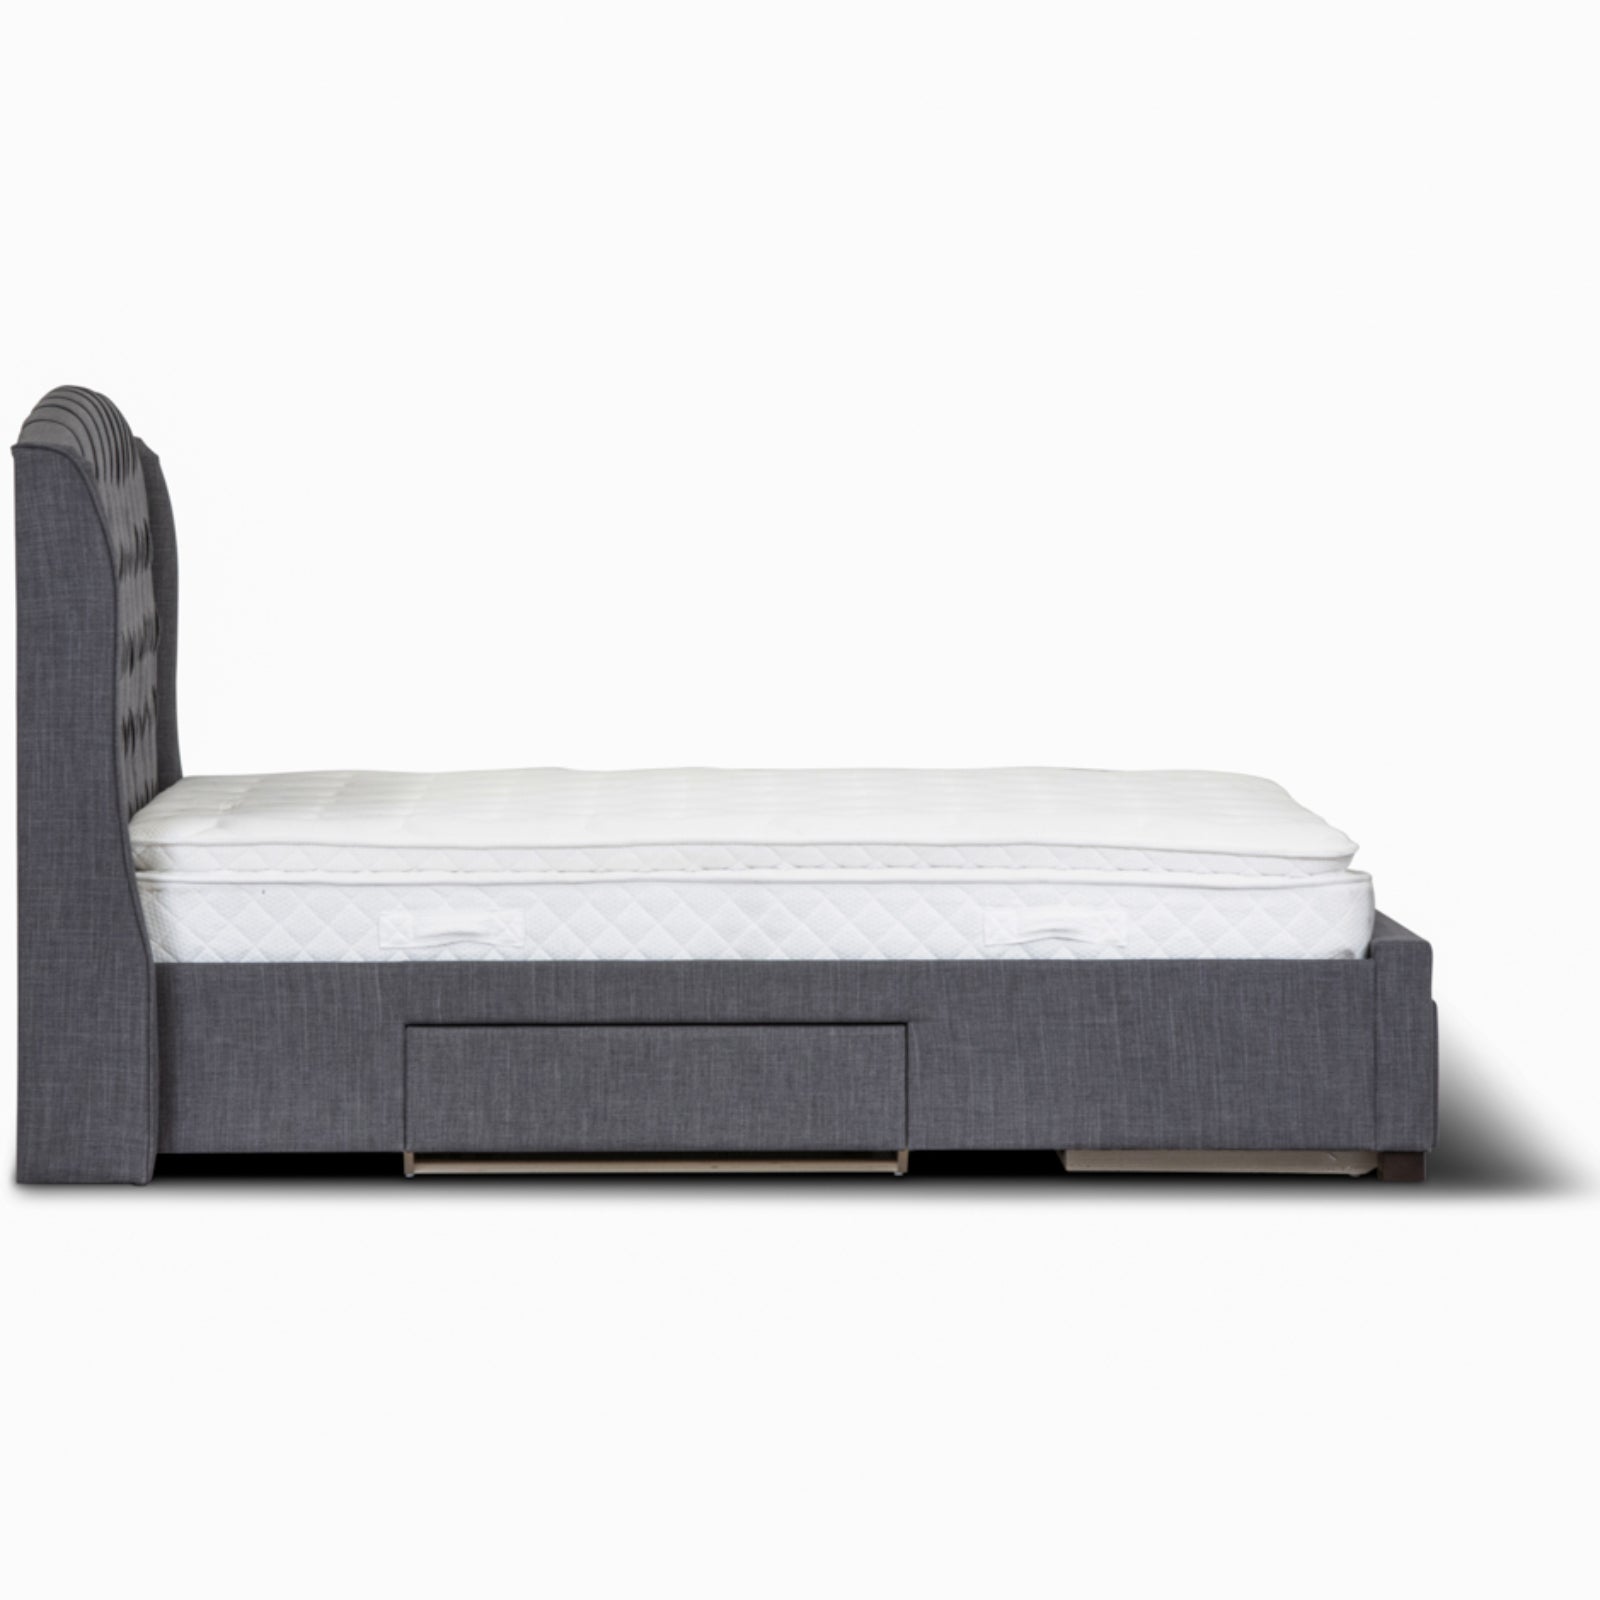 Honeydew Double Size Bed Frame Timber Mattress Base With Storage Drawers - Grey - SILBERSHELL